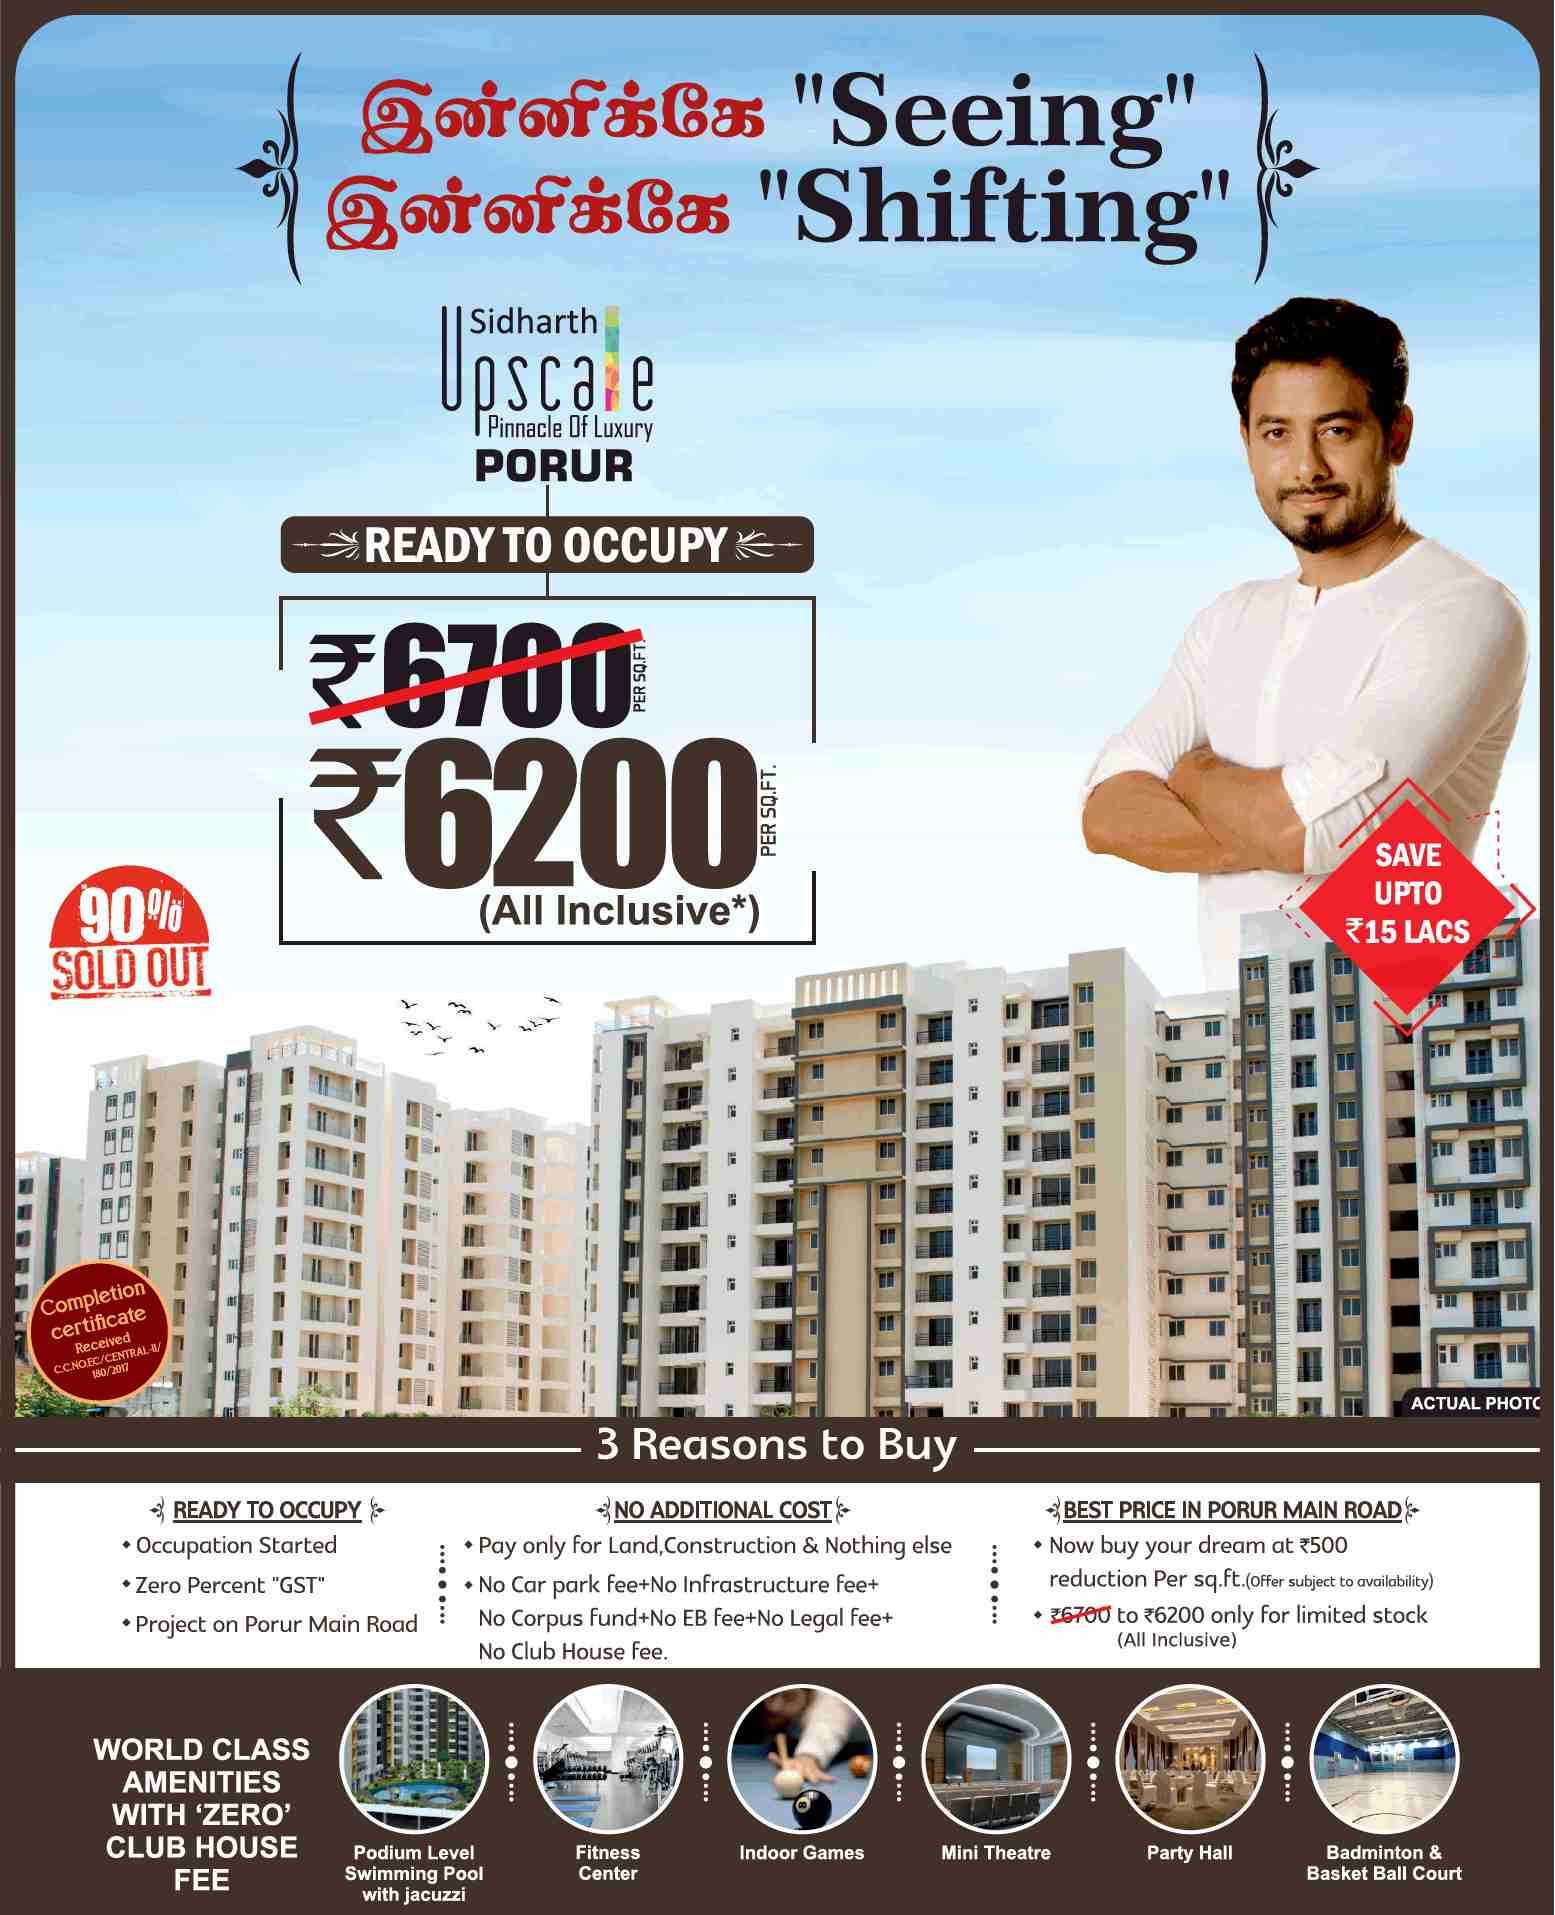 Enjoy world class amenities with zero clubhouse fee at Sidharth Upscale in Chennai Update